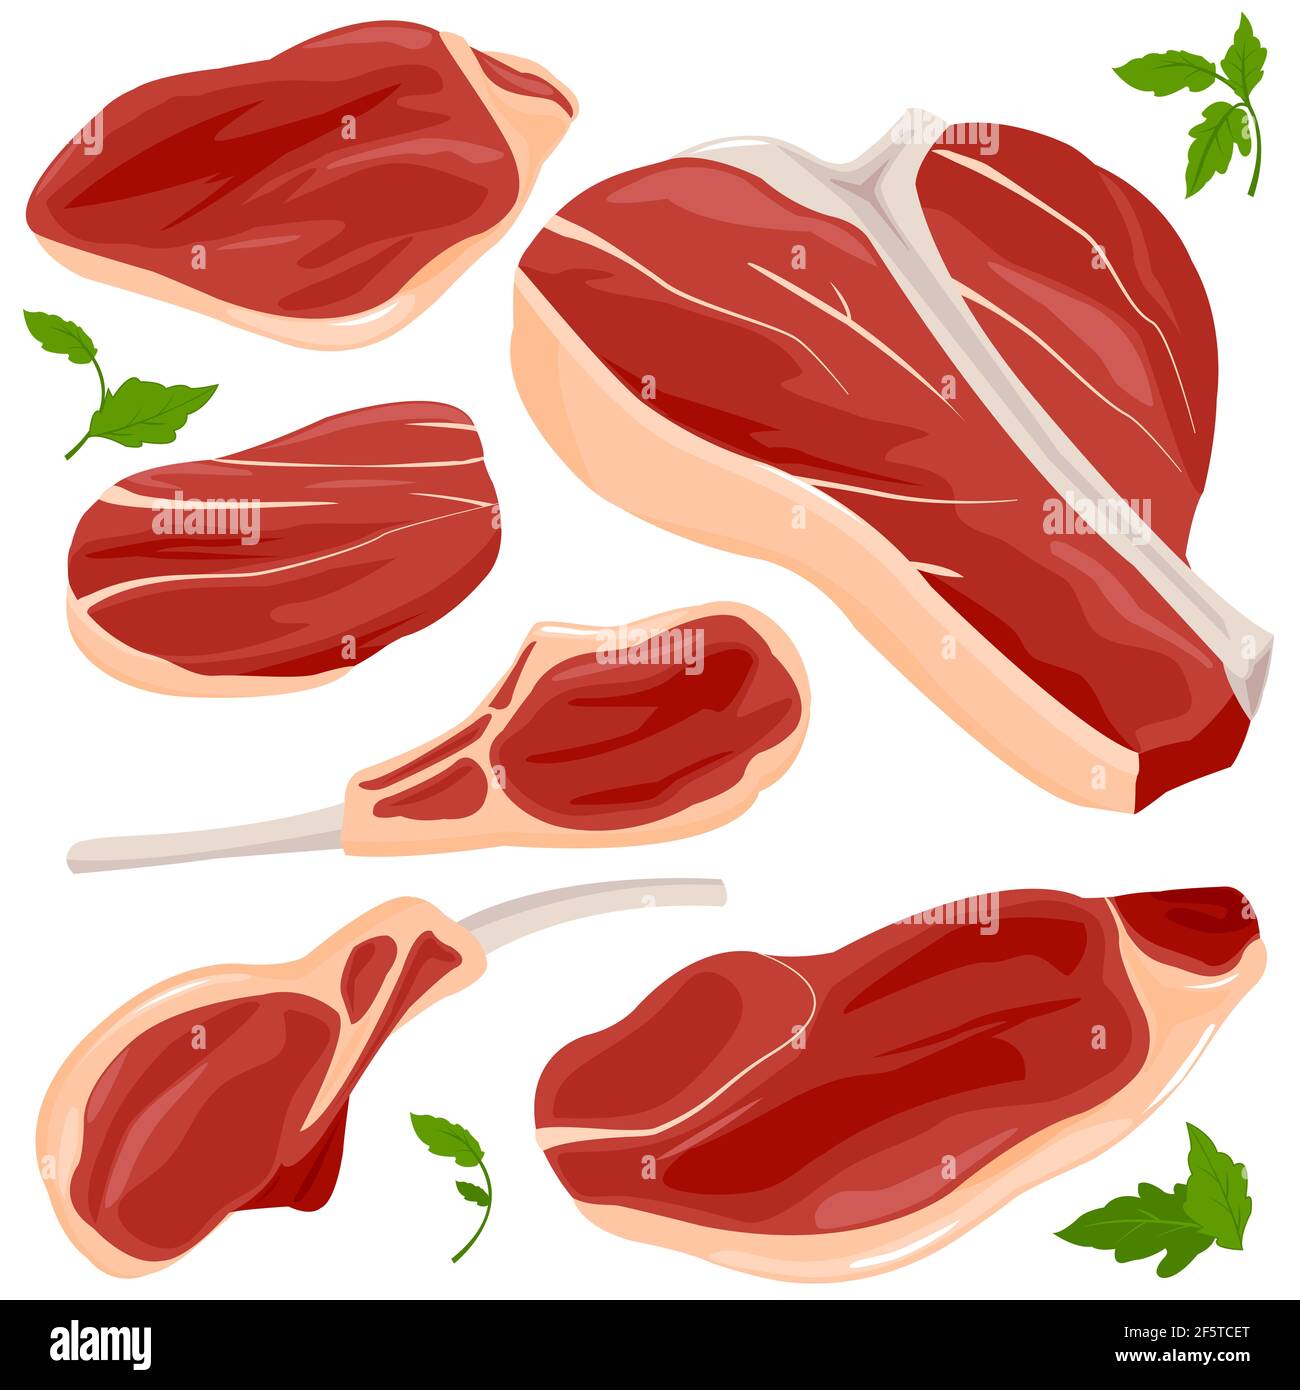 Red raw meat and steaks. Stock Photo